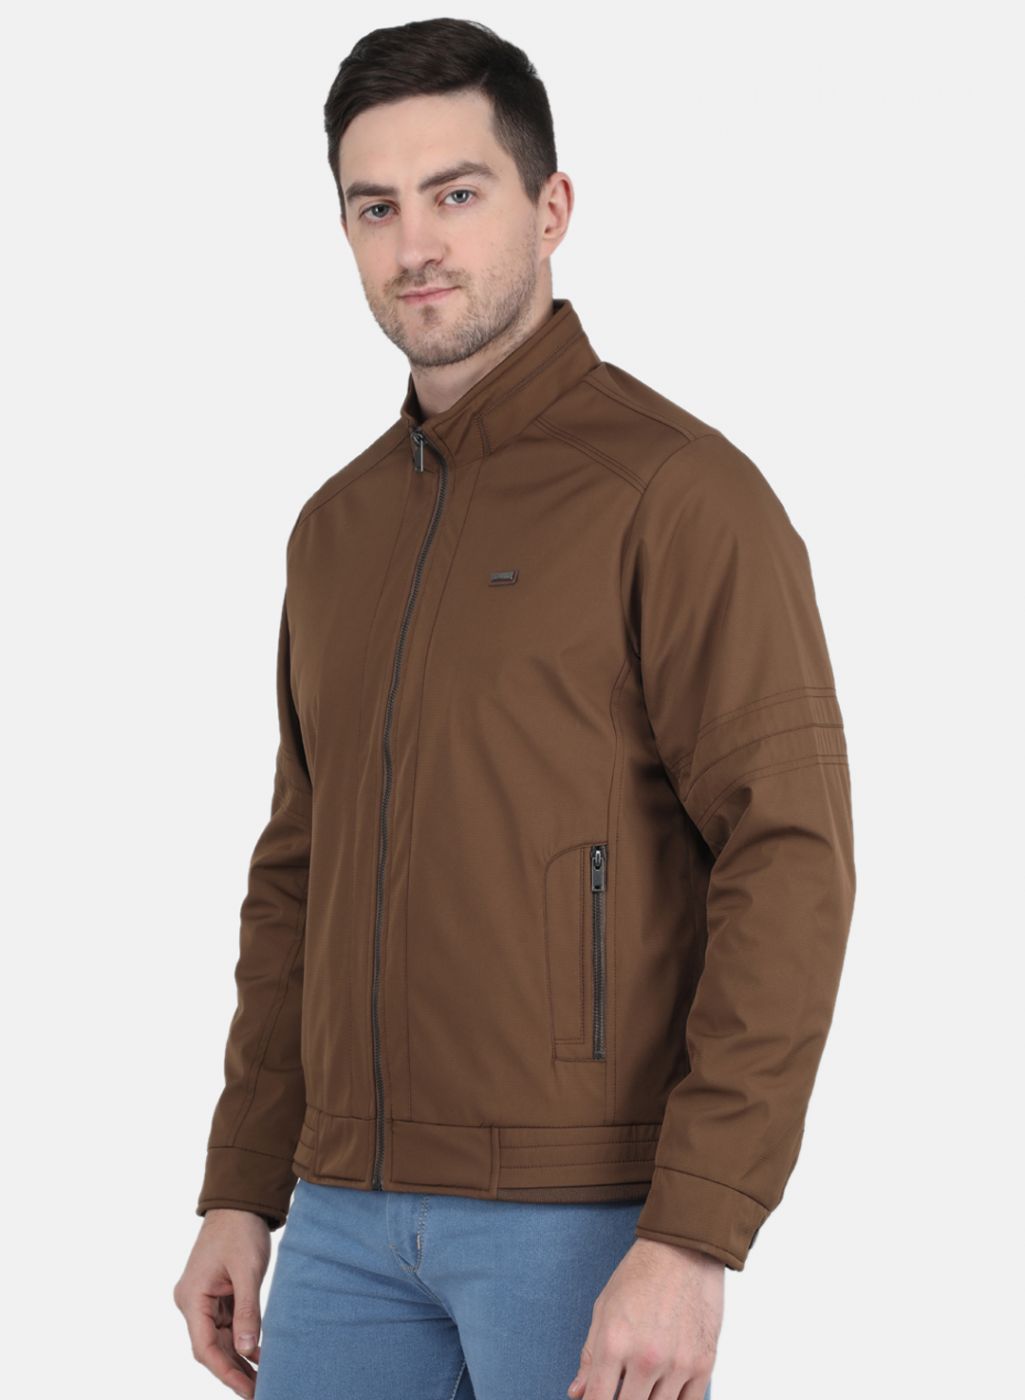 Carhartt Men's Dark Brown Woven Hooded Insulated Work Jacket (Xx-large  Long) in the Work Jackets & Coats department at Lowes.com